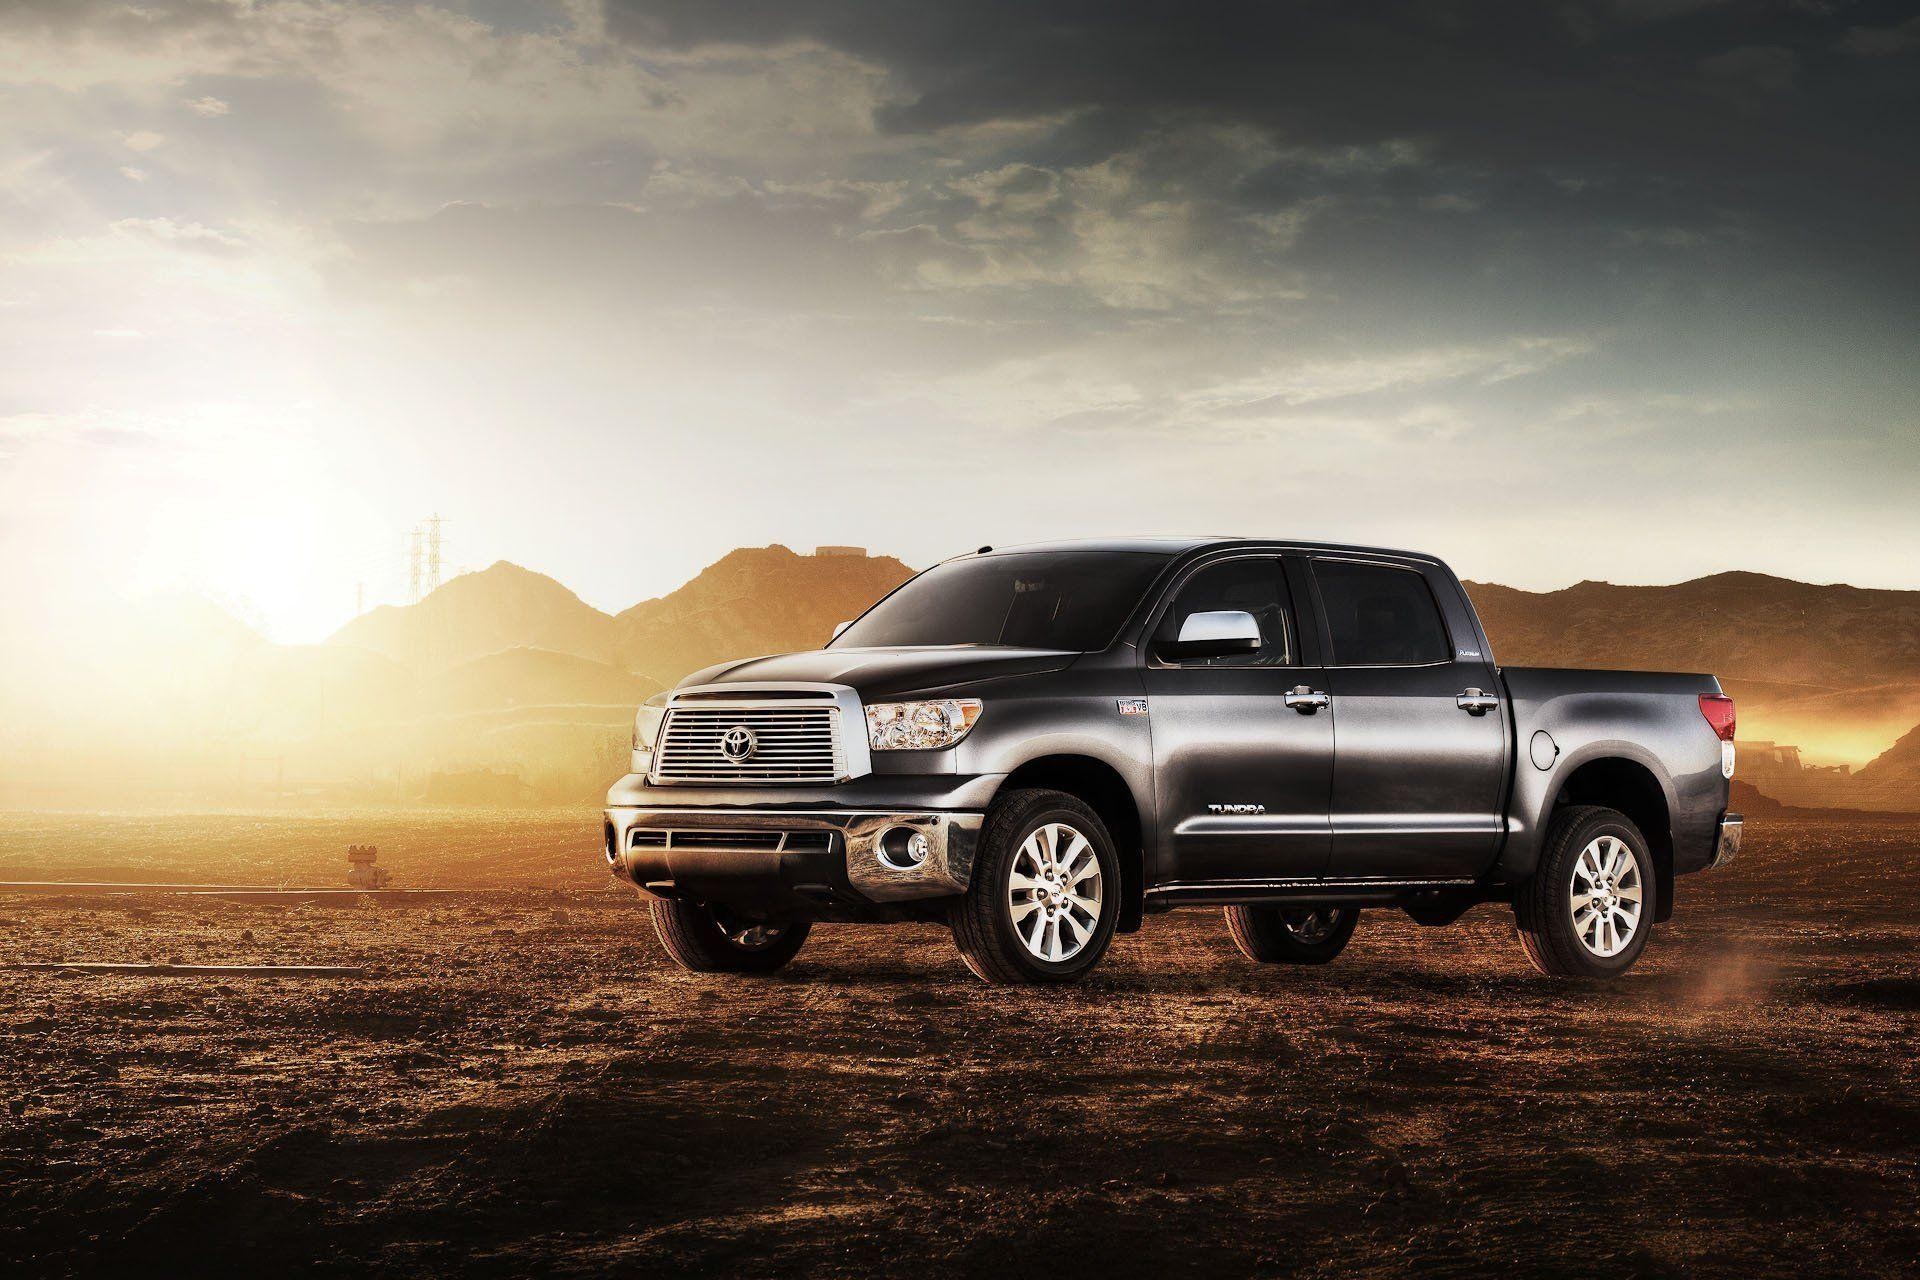 Toyota Tundra, Car wallpapers, Truck images, Vehicle showcase, 1920x1280 HD Desktop